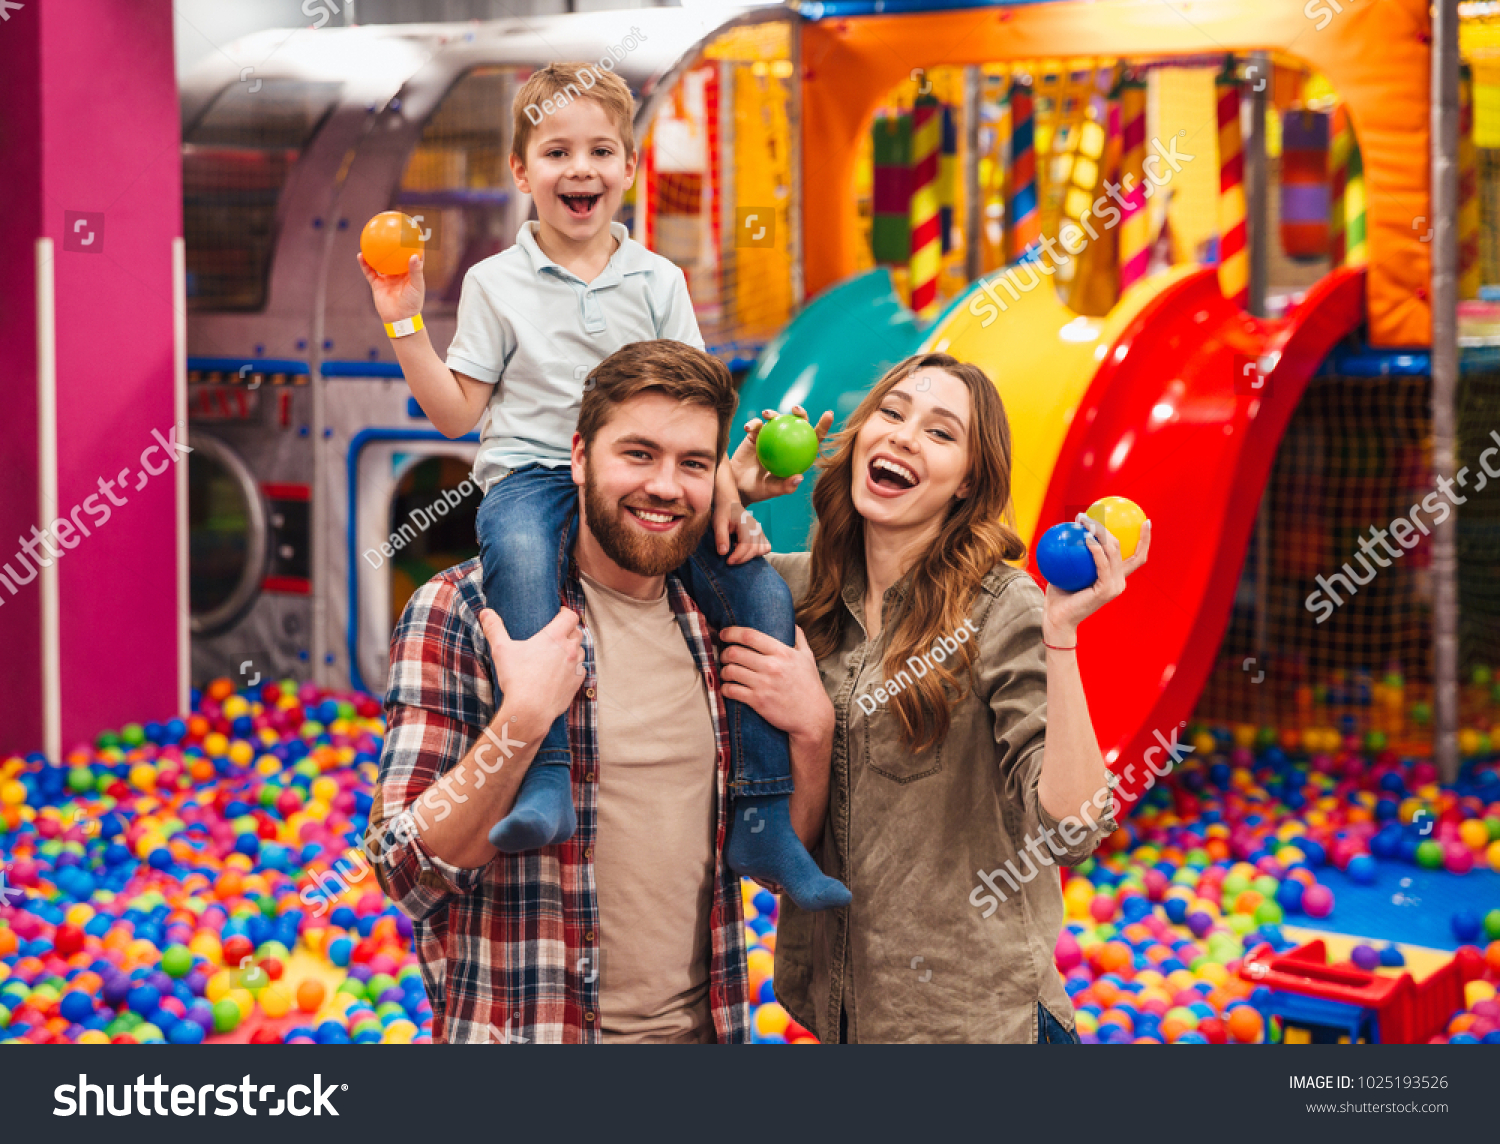 Image of emotional cheerful little child have fun with his parents in entertainment game center. #1025193526